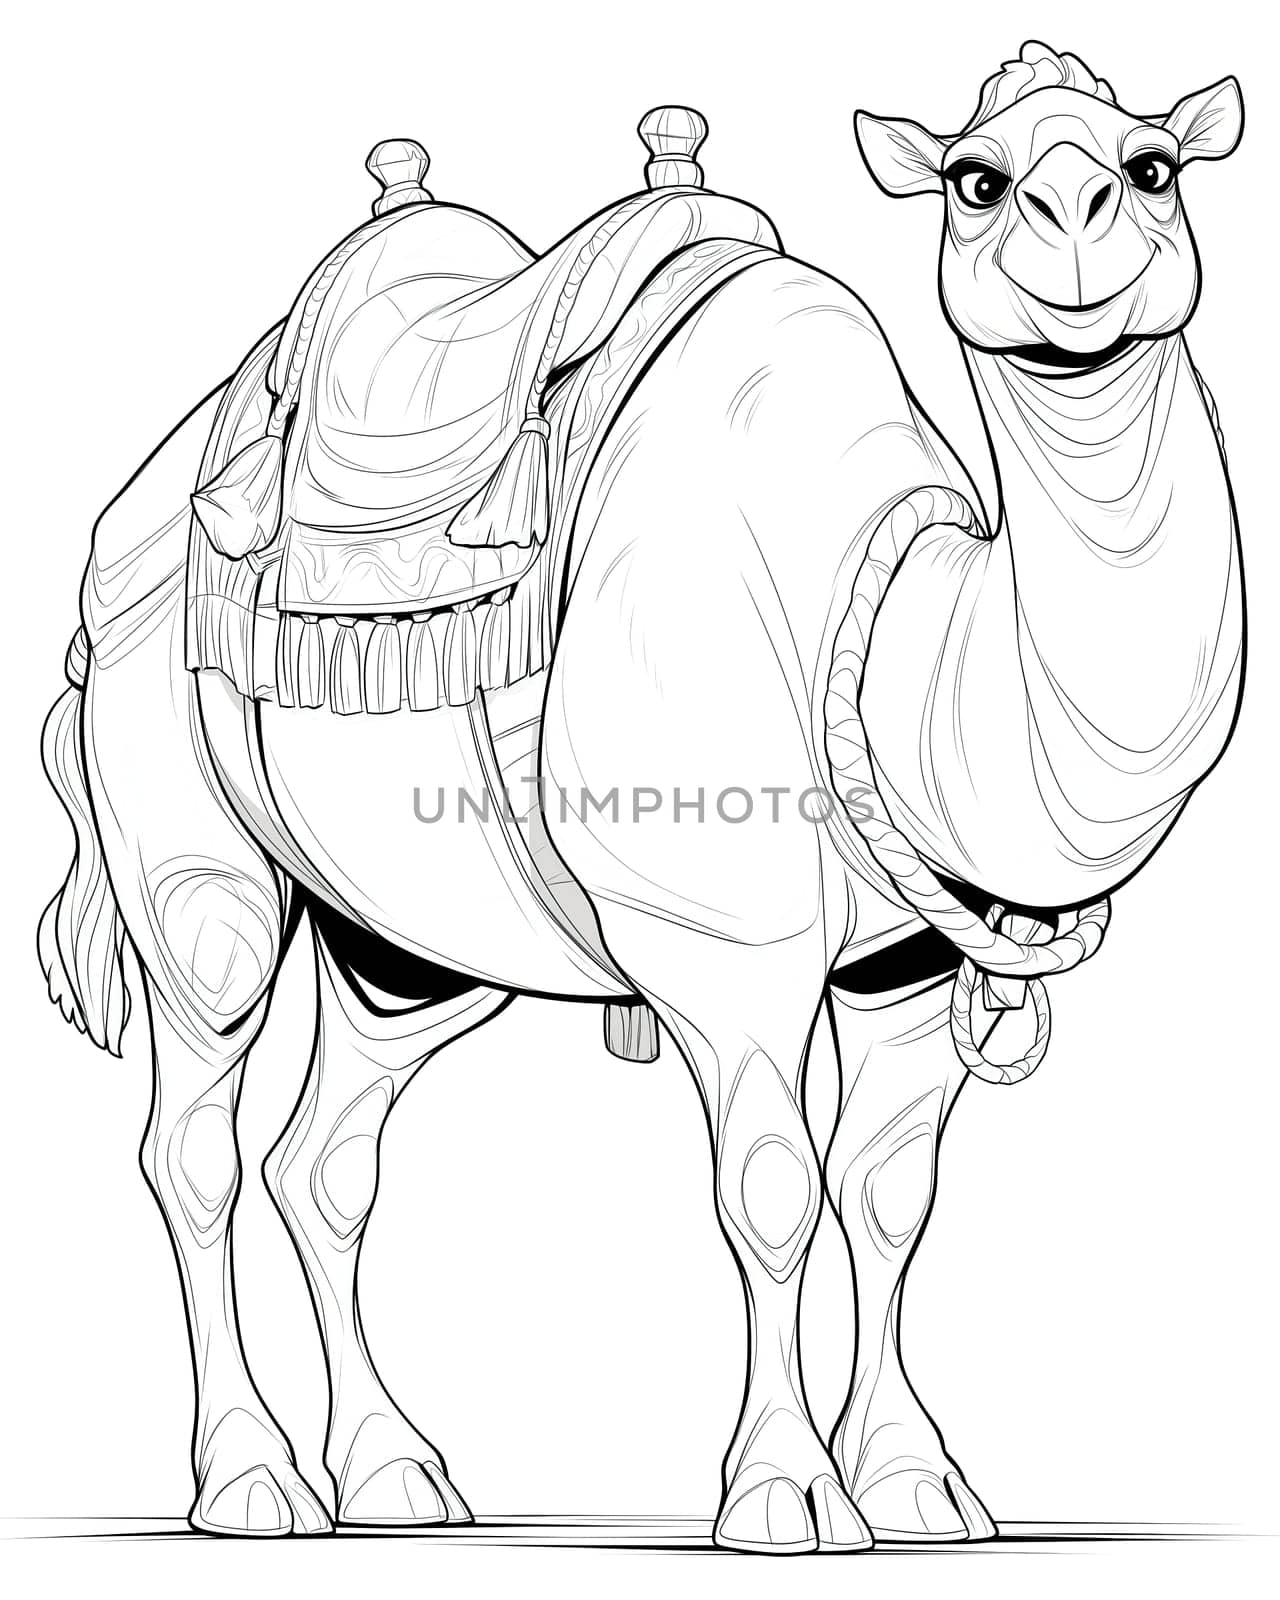 Coloring book for children, coloring animal, camel. by Fischeron